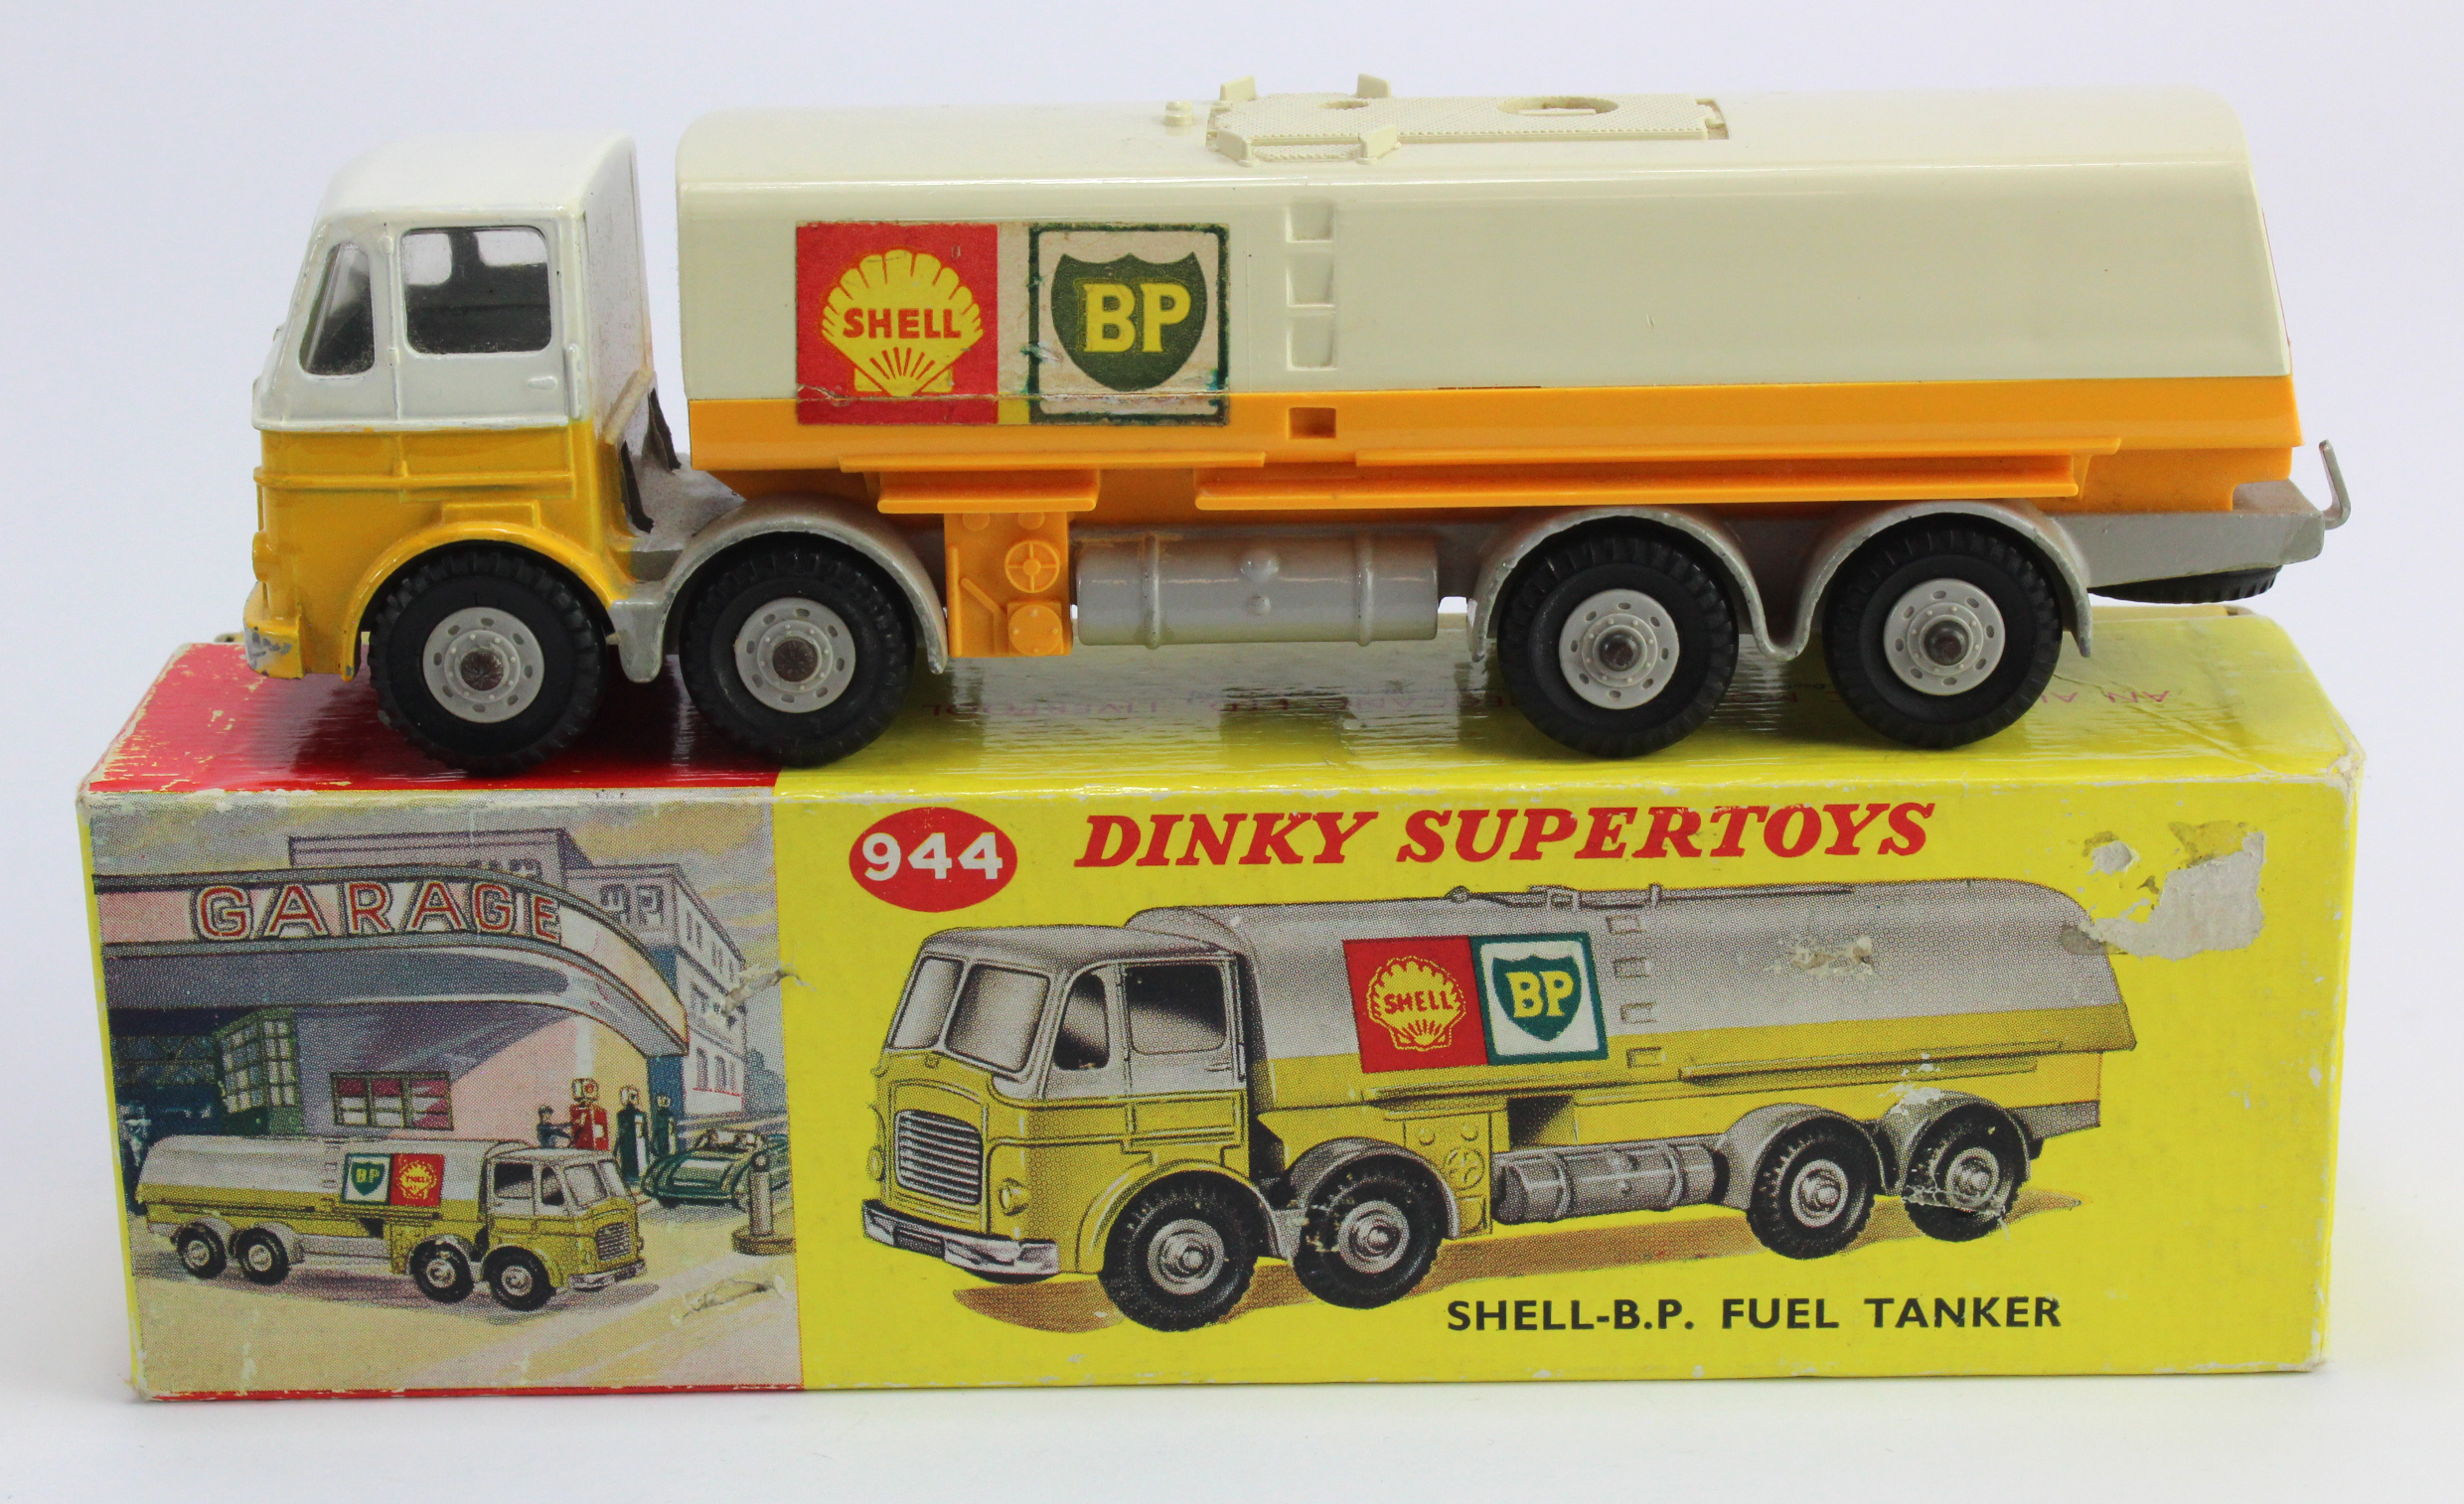 Dinky Supertoys, no. 944 'Shell BP Fuel Tanker', contained in original box